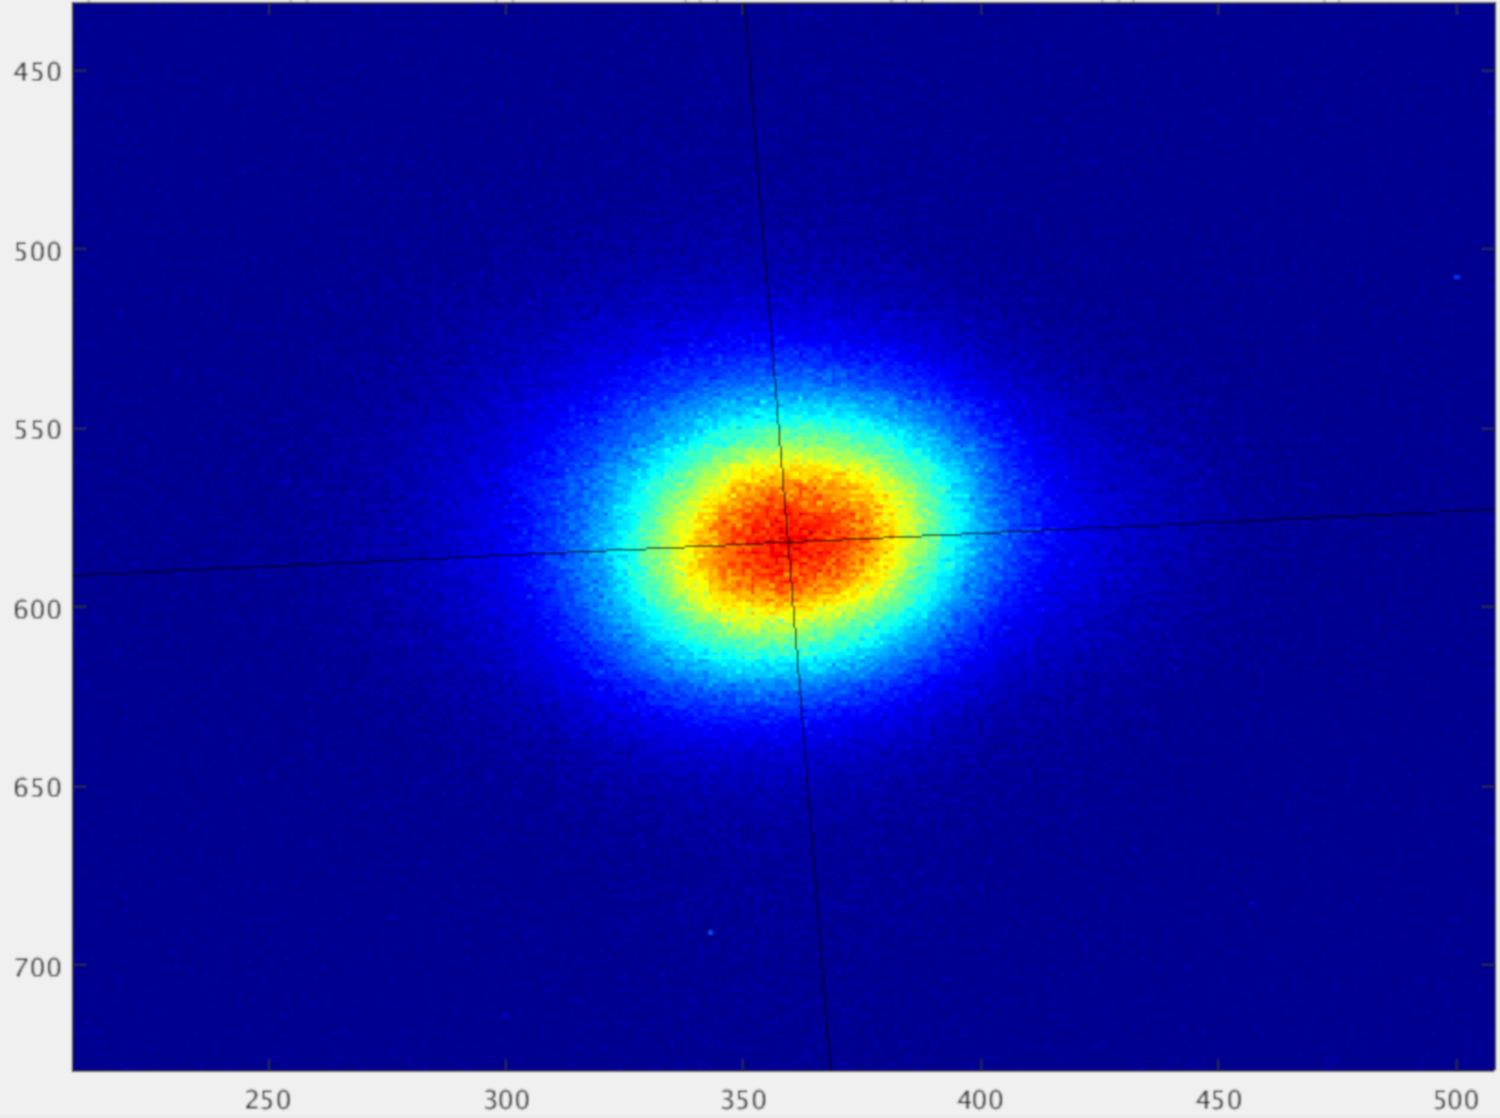 Image - This image shows the profile of an electron beam at Berkeley Lab’s Advanced Light Source synchrotron, represented as pixels measured by a charged coupled device (CCD) sensor. When stabilized by a machine-learning algorithm, the beam has a horizontal size dimension of 49 microns root mean squared and vertical size dimension of 48 microns root mean squared. Demanding experiments require that the corresponding light-beam size be stable on time scales ranging from less than seconds to hours to ensure reliable data. (Credit: Lawrence Berkeley National Laboratory)